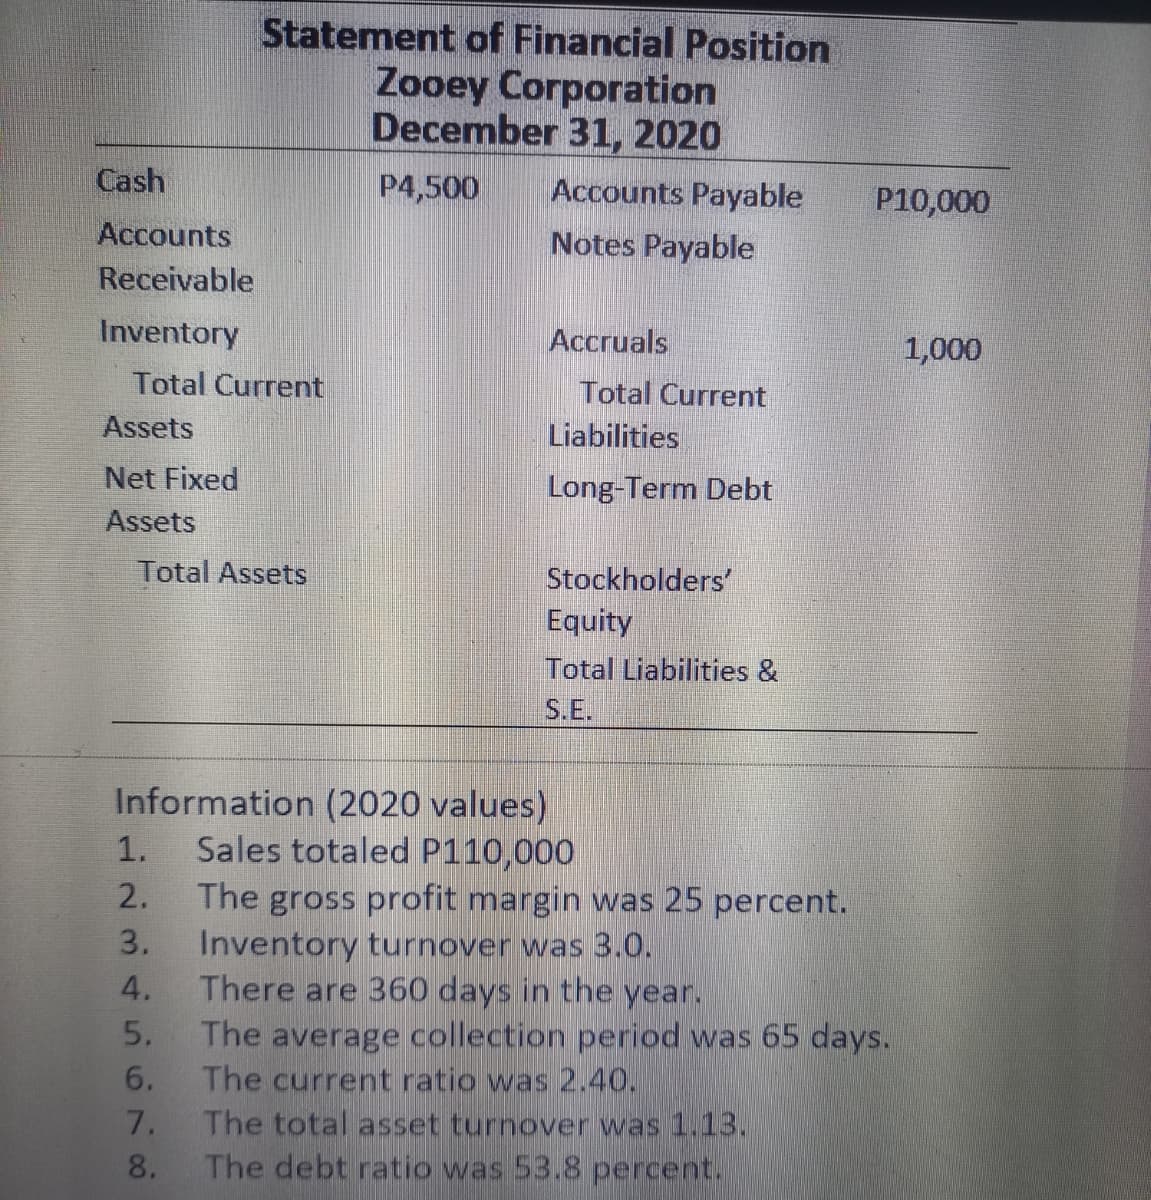 Statement of Financial Position
Zooey Corporation
December 31, 2020
Cash
P4,500
Accounts Payable
P10,000
Accounts
Notes Payable
Receivable
Inventory
Accruals
1,000
Total Current
Total Current
Assets
Liabilities
Net Fixed
Long-Term Debt
Assets
Total Assets
Stockholders'
Equity
Total Liabilities &
S.E.
Information (2020 values)
Sales totaled P110,000
The gross profit margin was 25 percent.
Inventory turnover was 3.0.
There are 360 days in the year.
The average collection period was 65 days.
The current ratio was 2.40.
The total asset turnover was 1.13.
The debt ratio was 53.8 percent.
1.
2.
3.
4.
5.
6.
7.
8.
